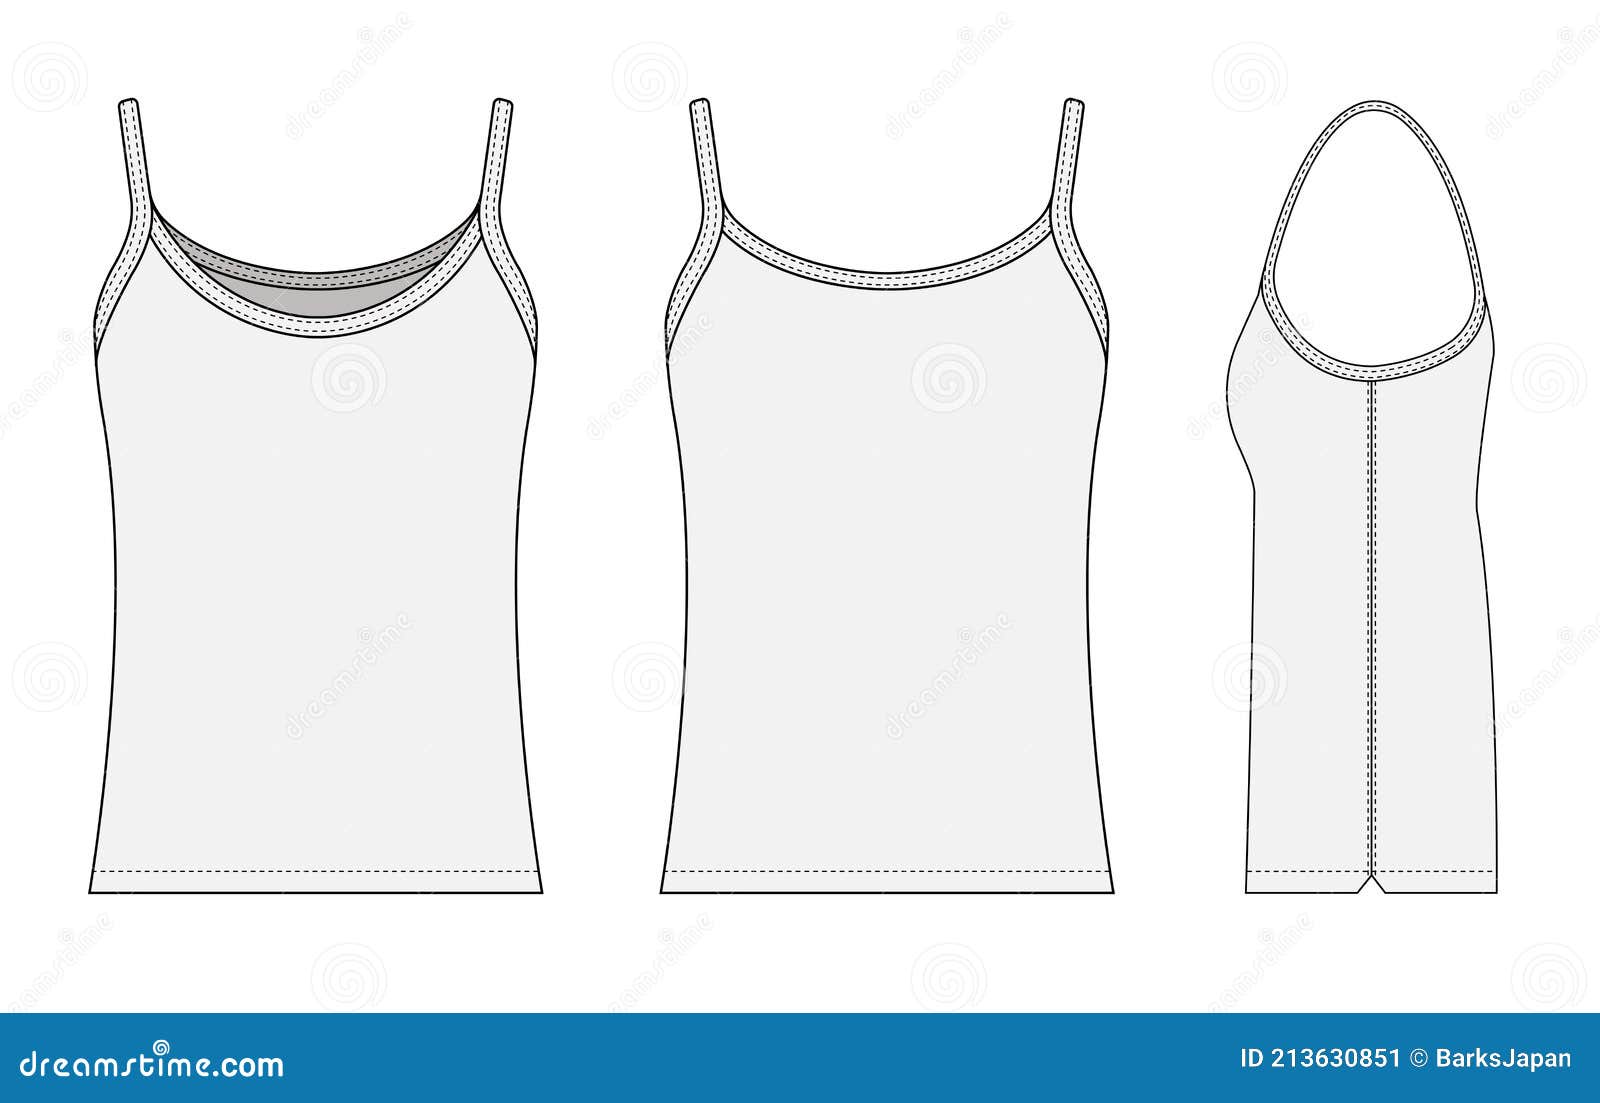 Woman Camisole Dress Template Vector Illustration Stock Vector ...